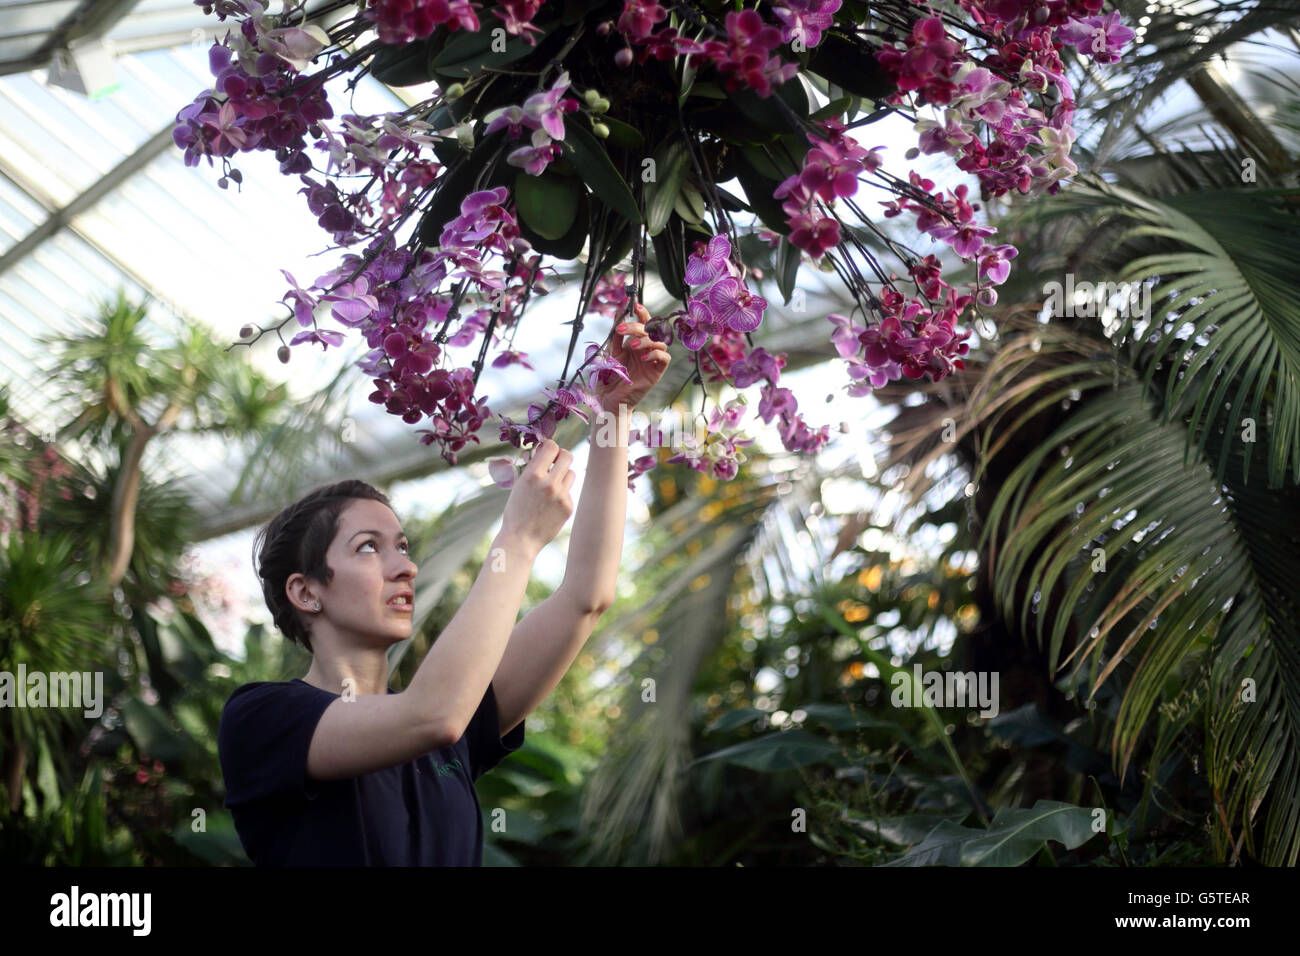 Katharine Cook puts the finishing touches to the Kew Orchid festival in the Prince of Wales Conservatory at Kew Gardens in West London. The exhibition called 'Orchids' runs from Saturday Febuary 9th to Sunday March 3rd 2013. Stock Photo